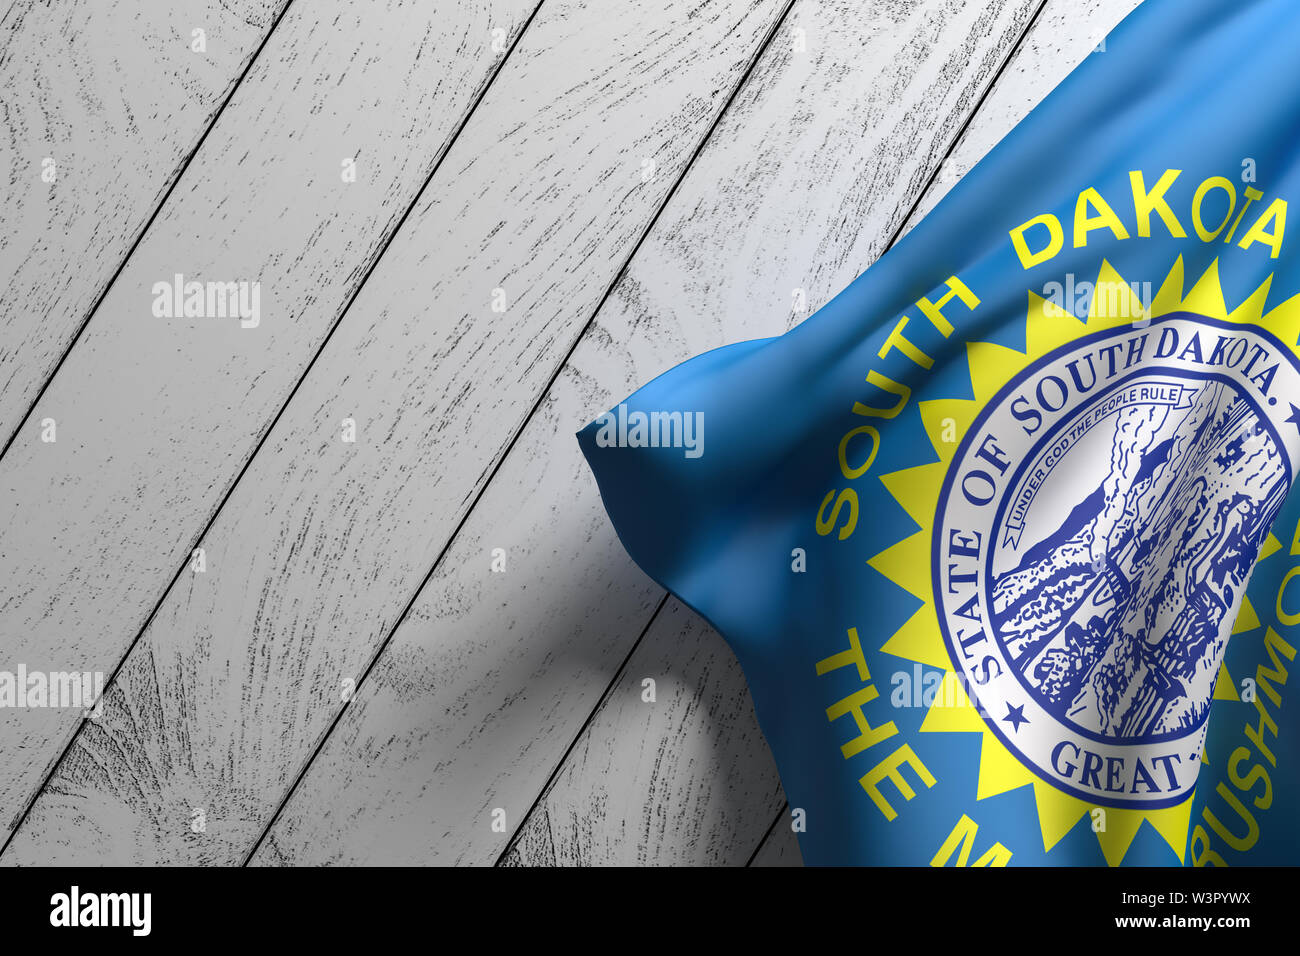 3d rendering of an American South Dakota State flag on a wooden surface Stock Photo